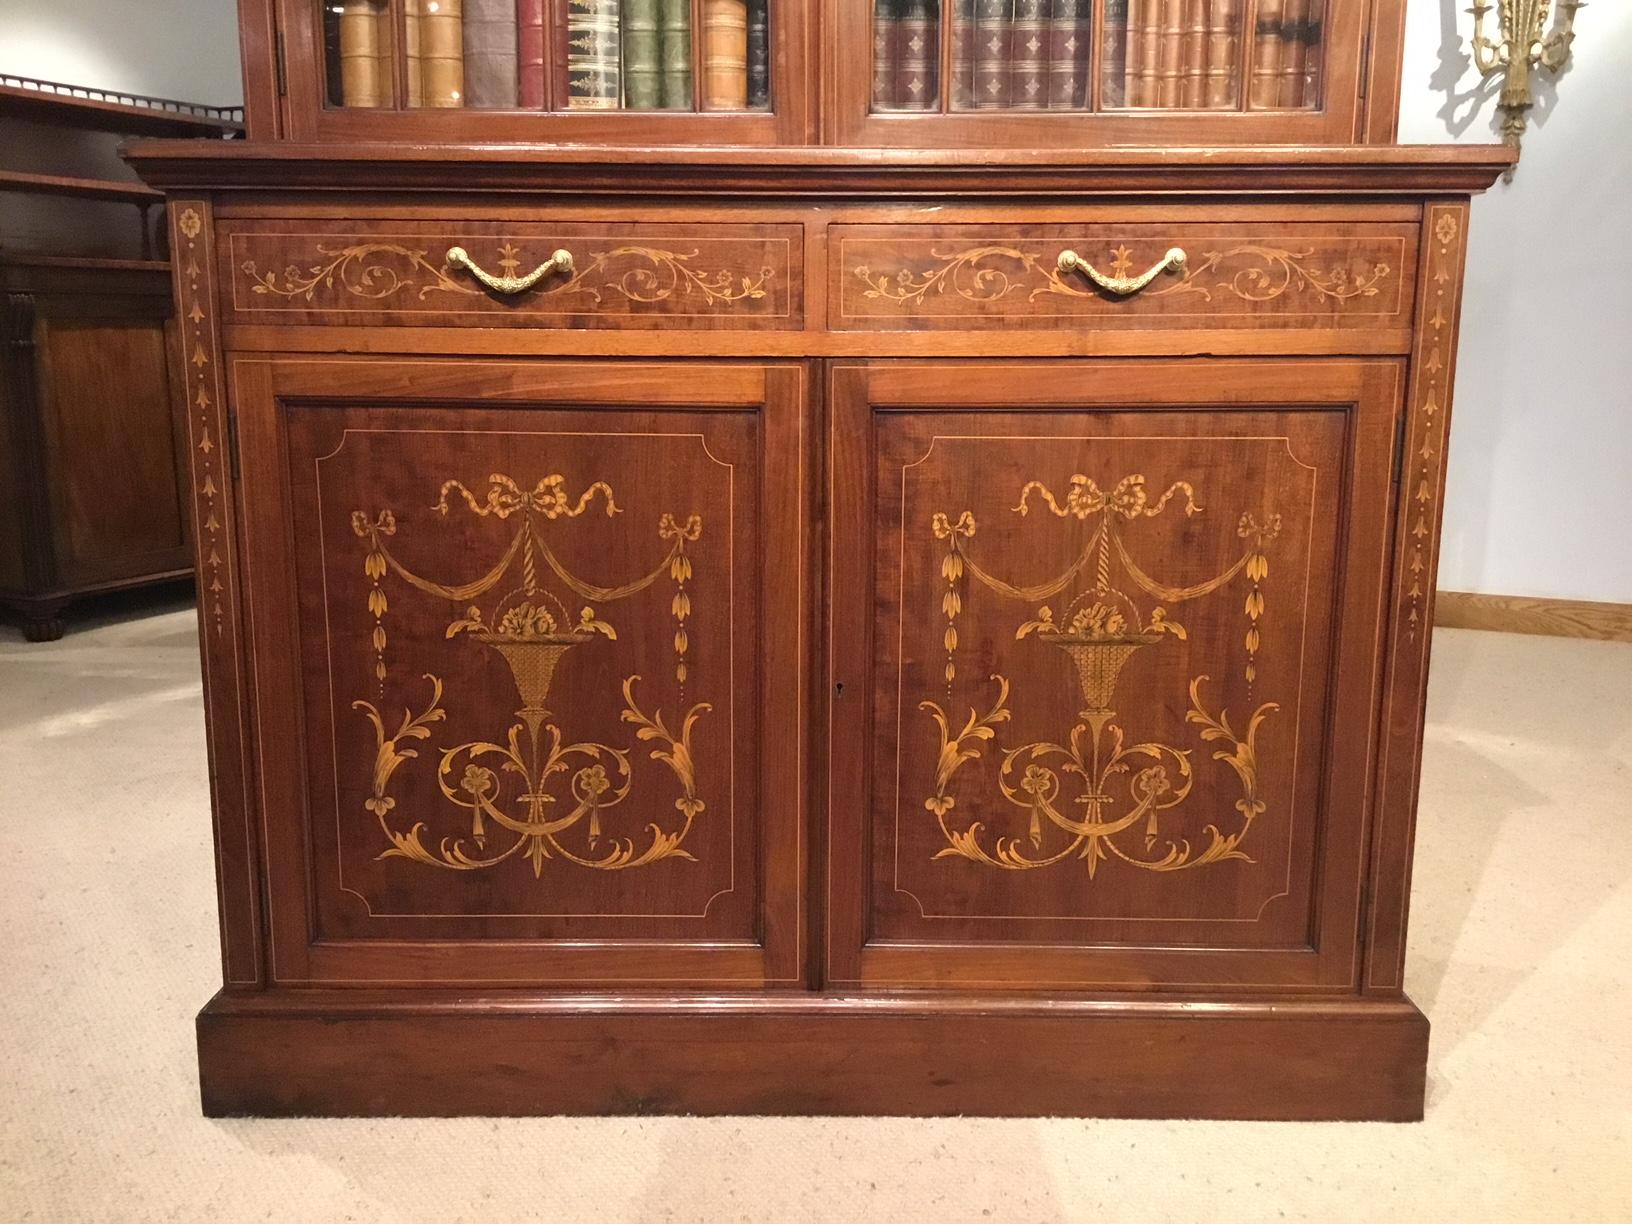  Marquetry Inlaid Edwardian Period Antique Bookcase 16